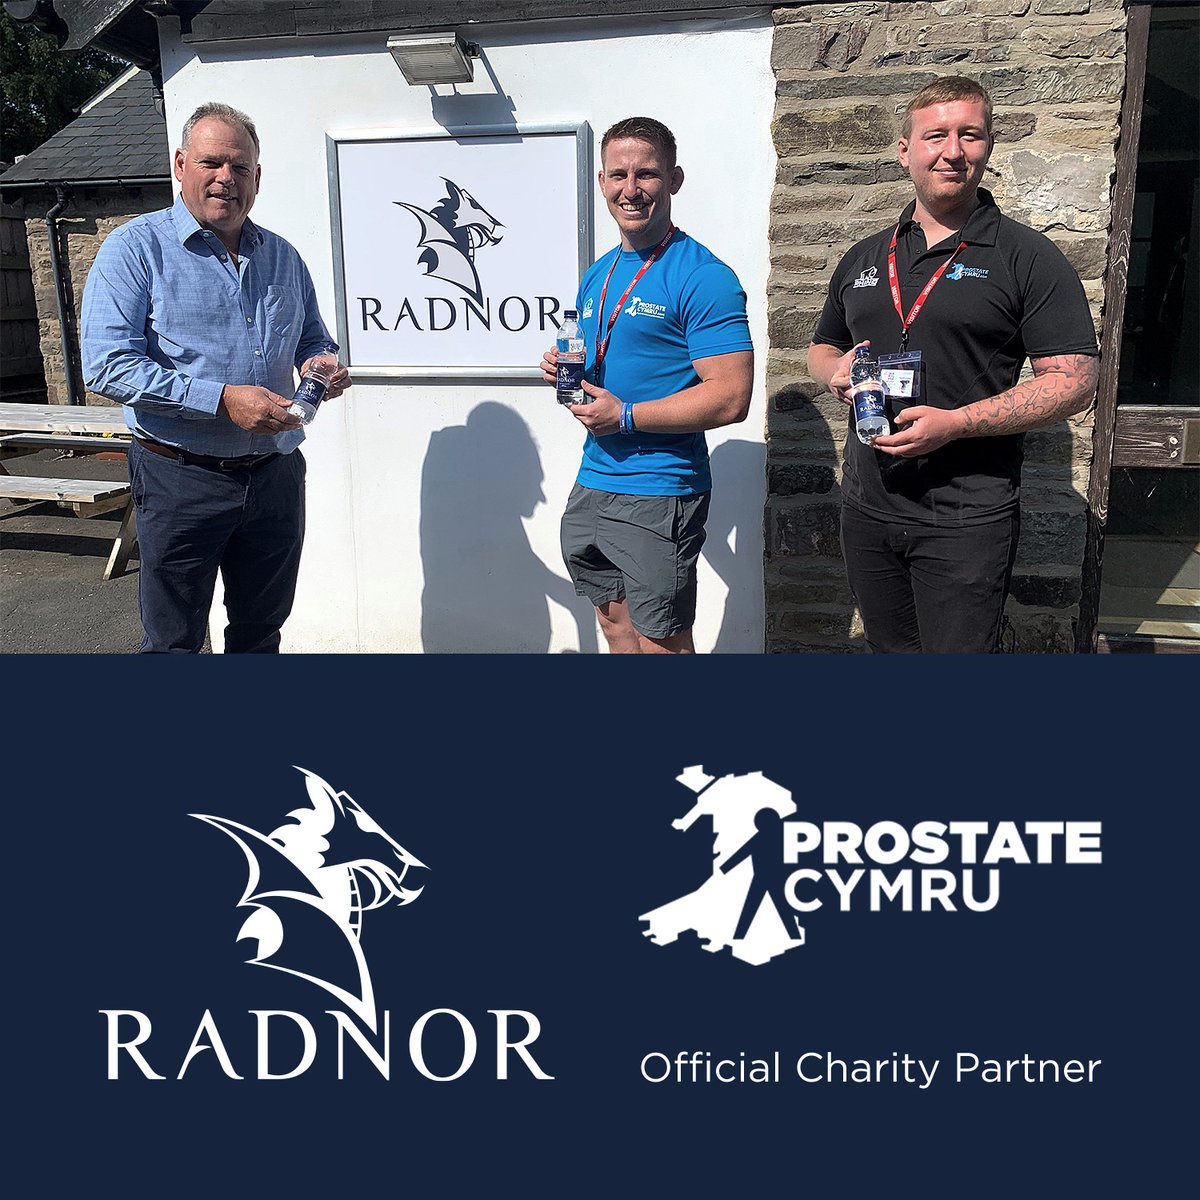 We are delighted to announce @ProstateCymru as an Official Charity Partner for 2021! Prostate Cymru is the leading prostate health charity in Wales, supporting men with prostate issues!